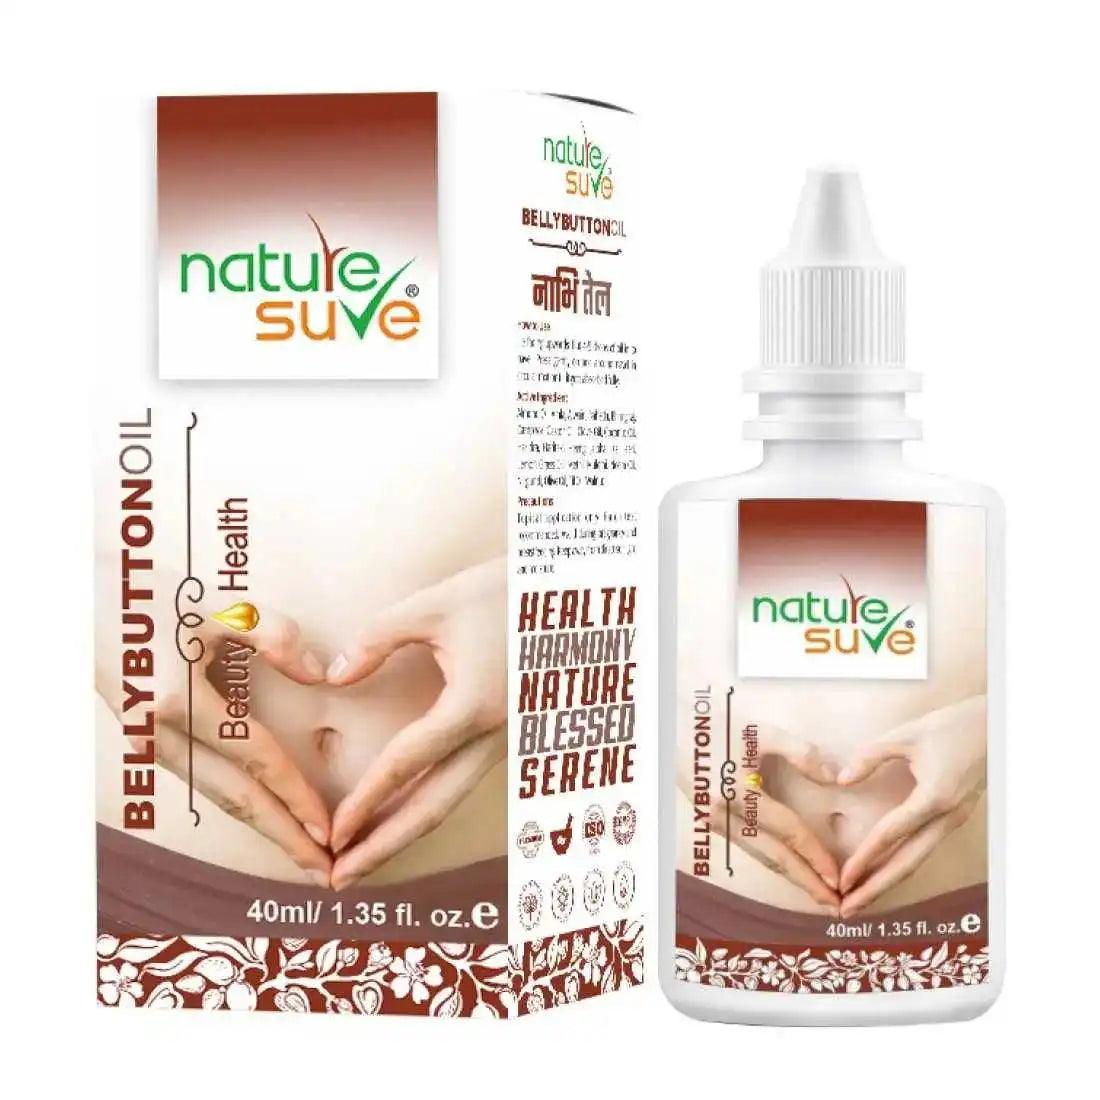 Buy 1 Pack Nature Sure Belly Button Nabhi Oil for Health and Beauty in Men & Women - everteen-neud.com